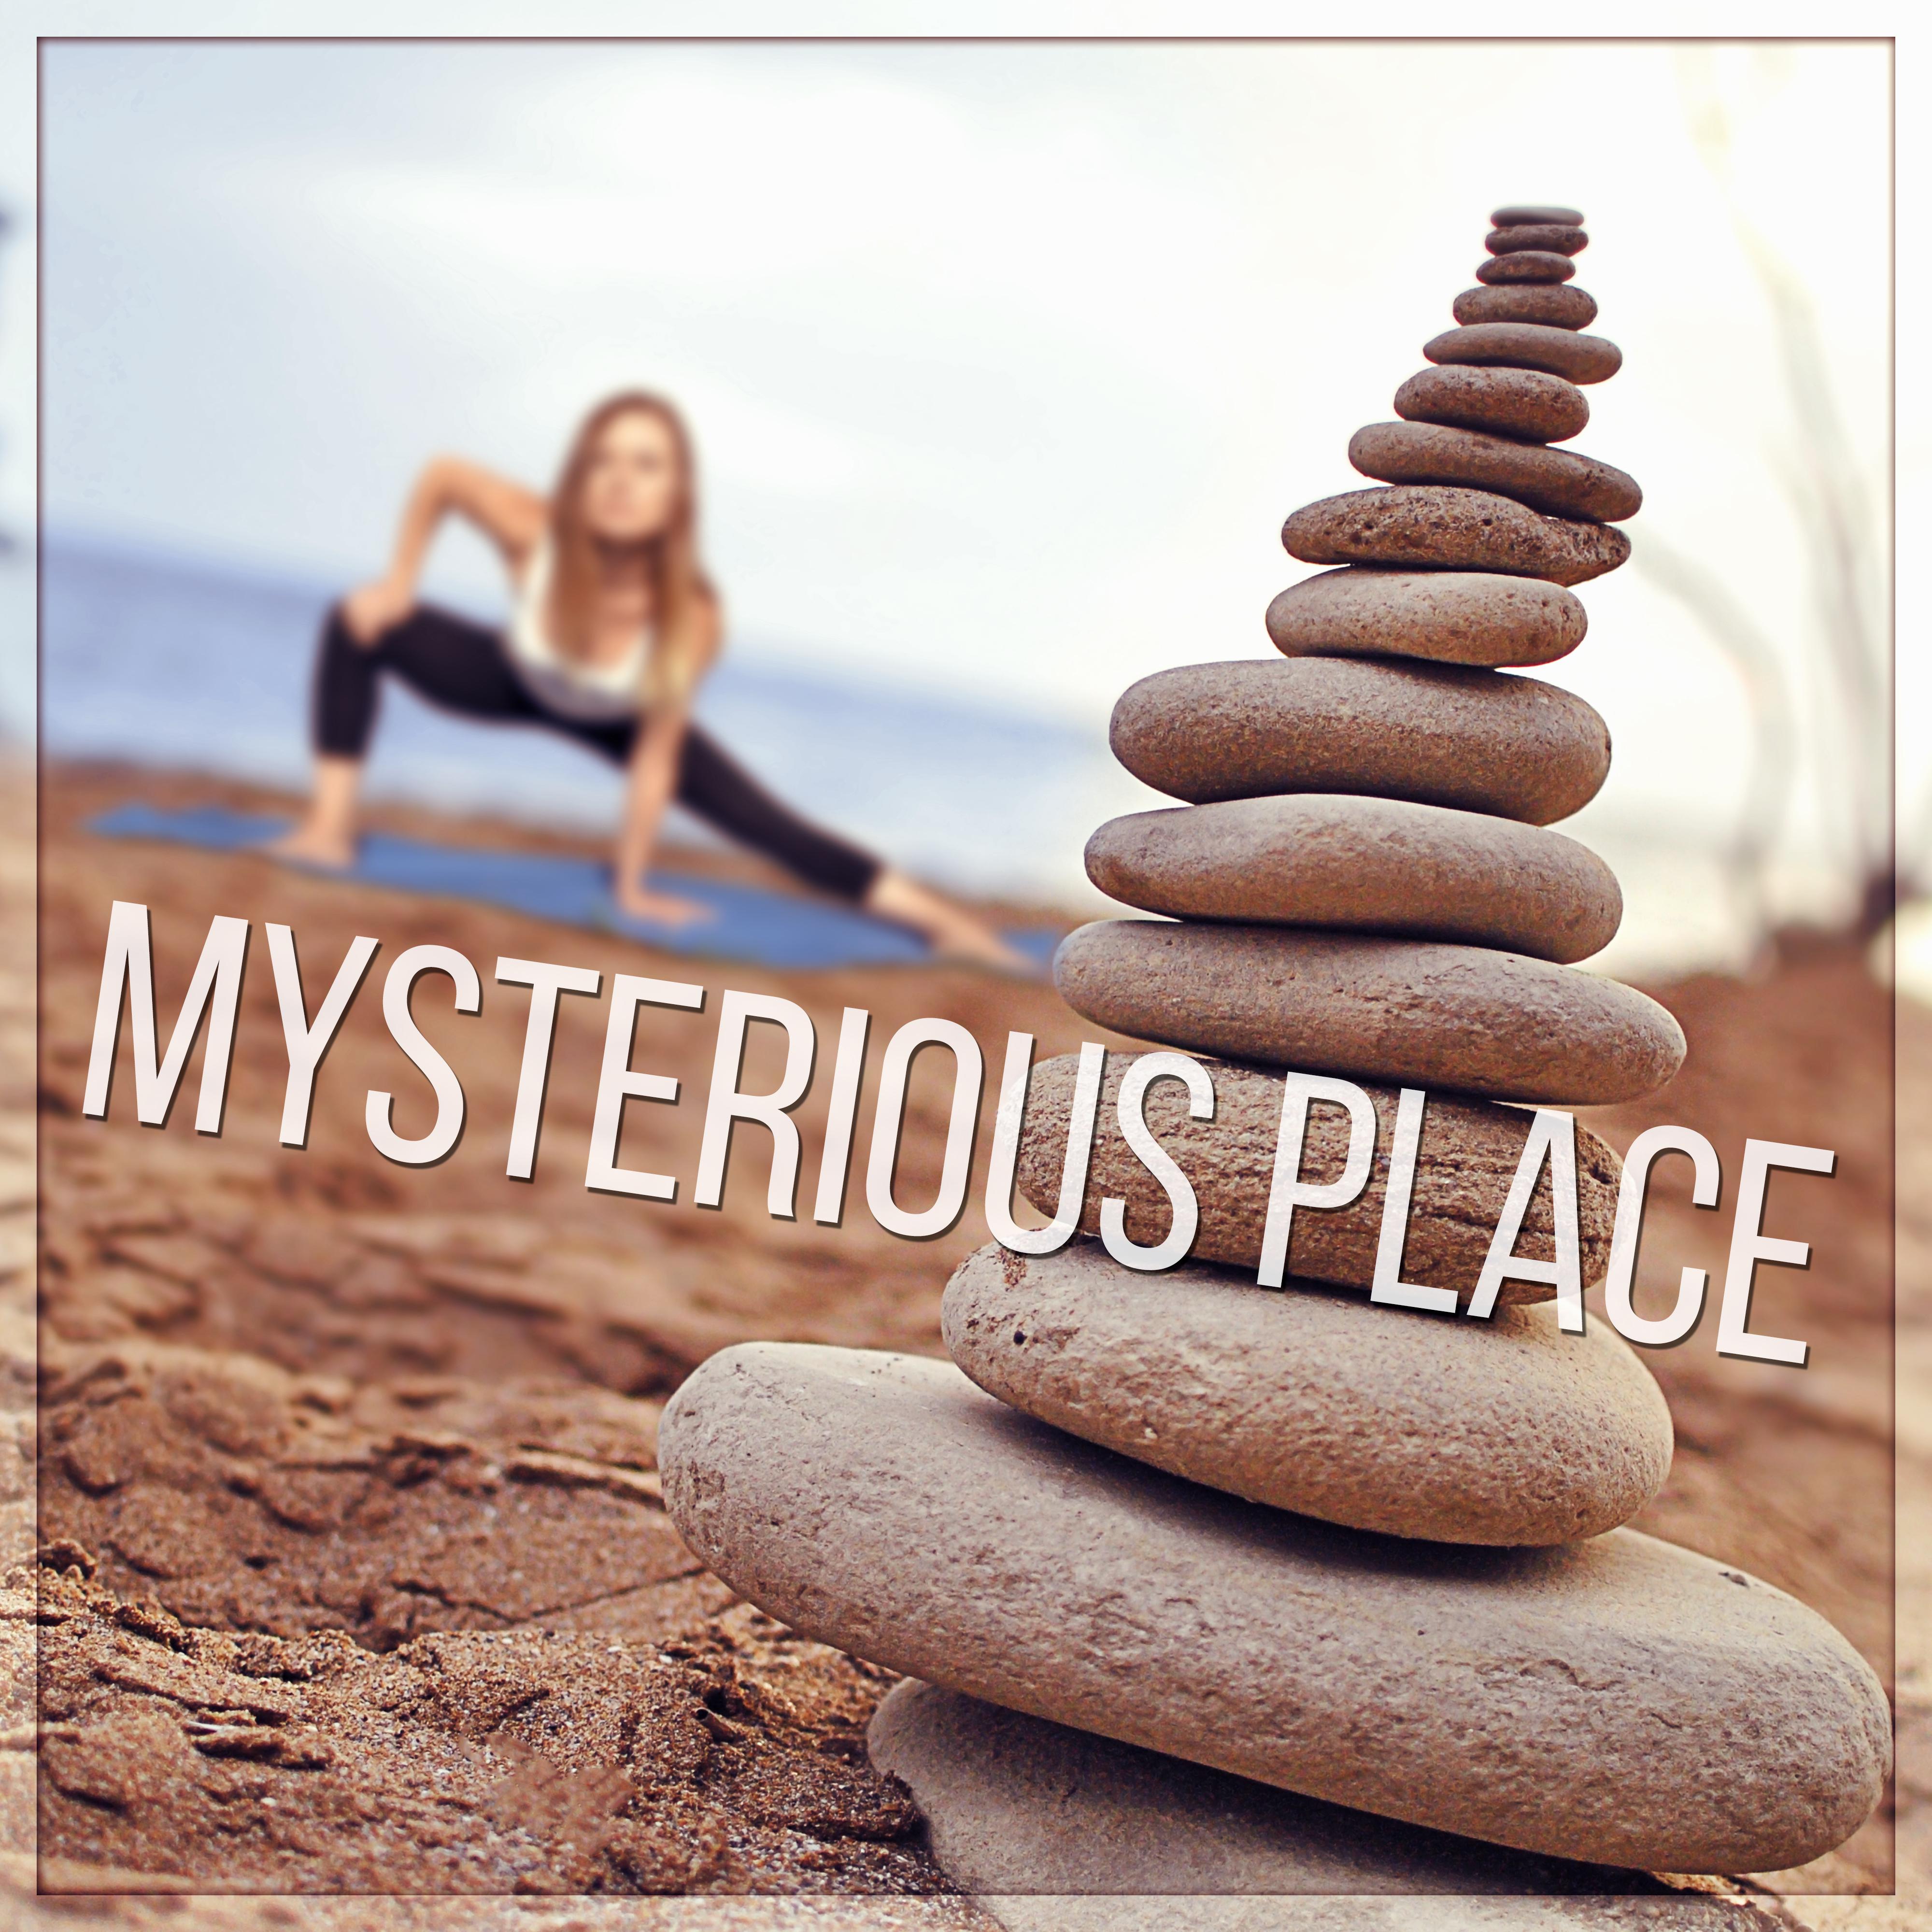 Mysterious Place  Relaxing Songs for Mindfulness Meditation  Yoga Exercises, Guided Imagery Music, Asian Zen Spa and Massage, Natural White Noise, Sounds of Nature